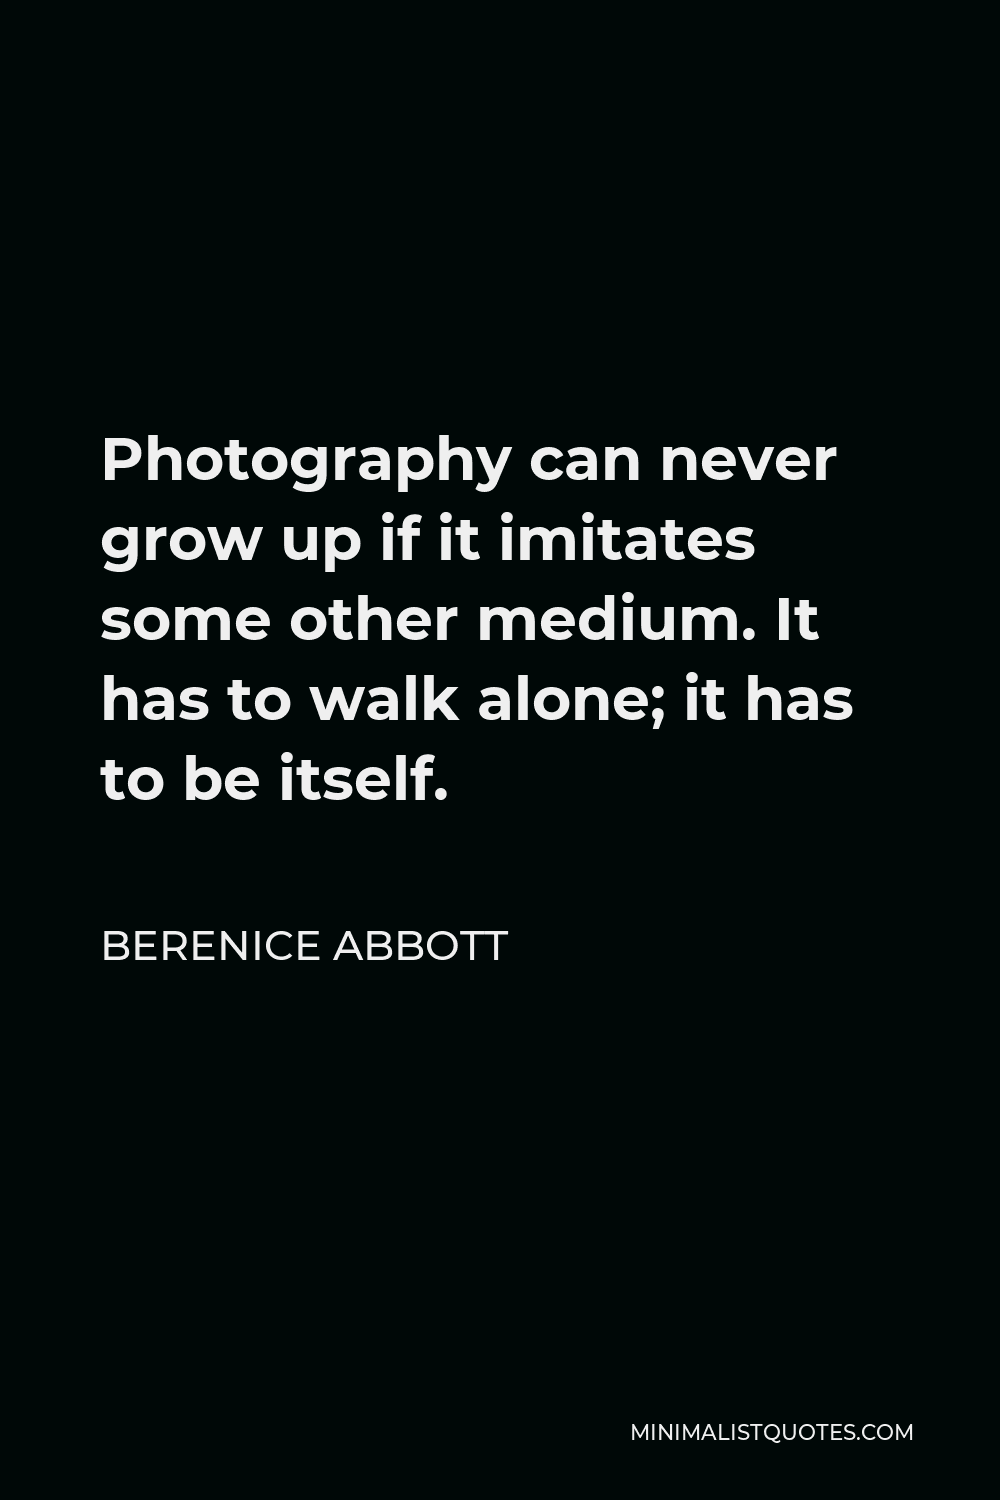 Berenice Abbott Quote - Photography can never grow up if it imitates some other medium. It has to walk alone; it has to be itself.